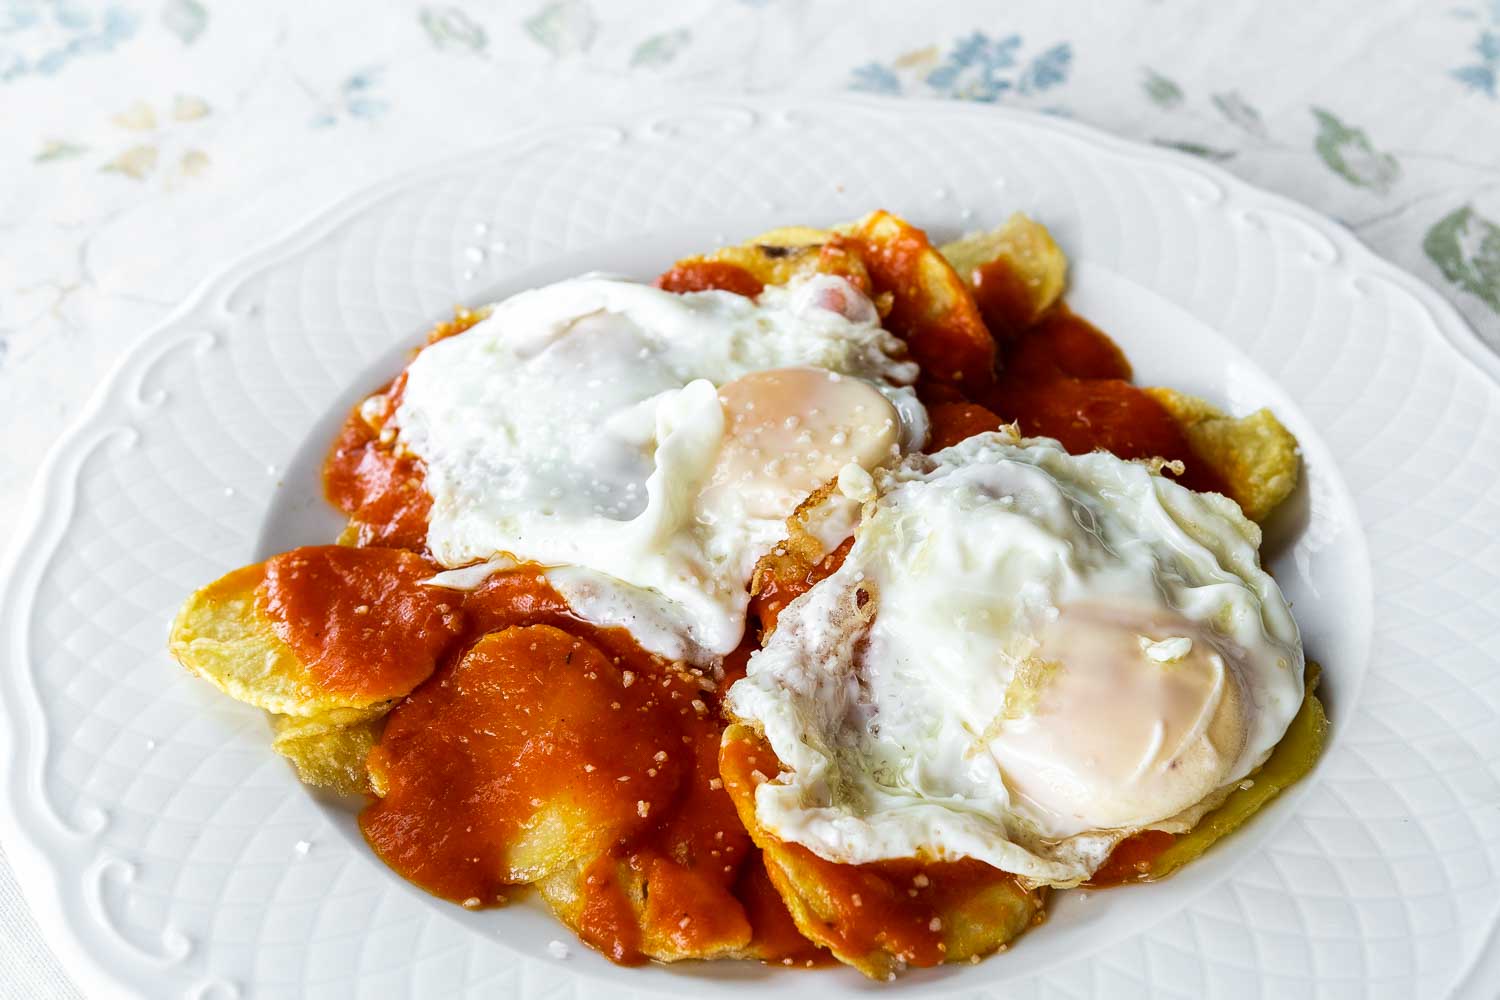 Tomato, fried egg and potatoes